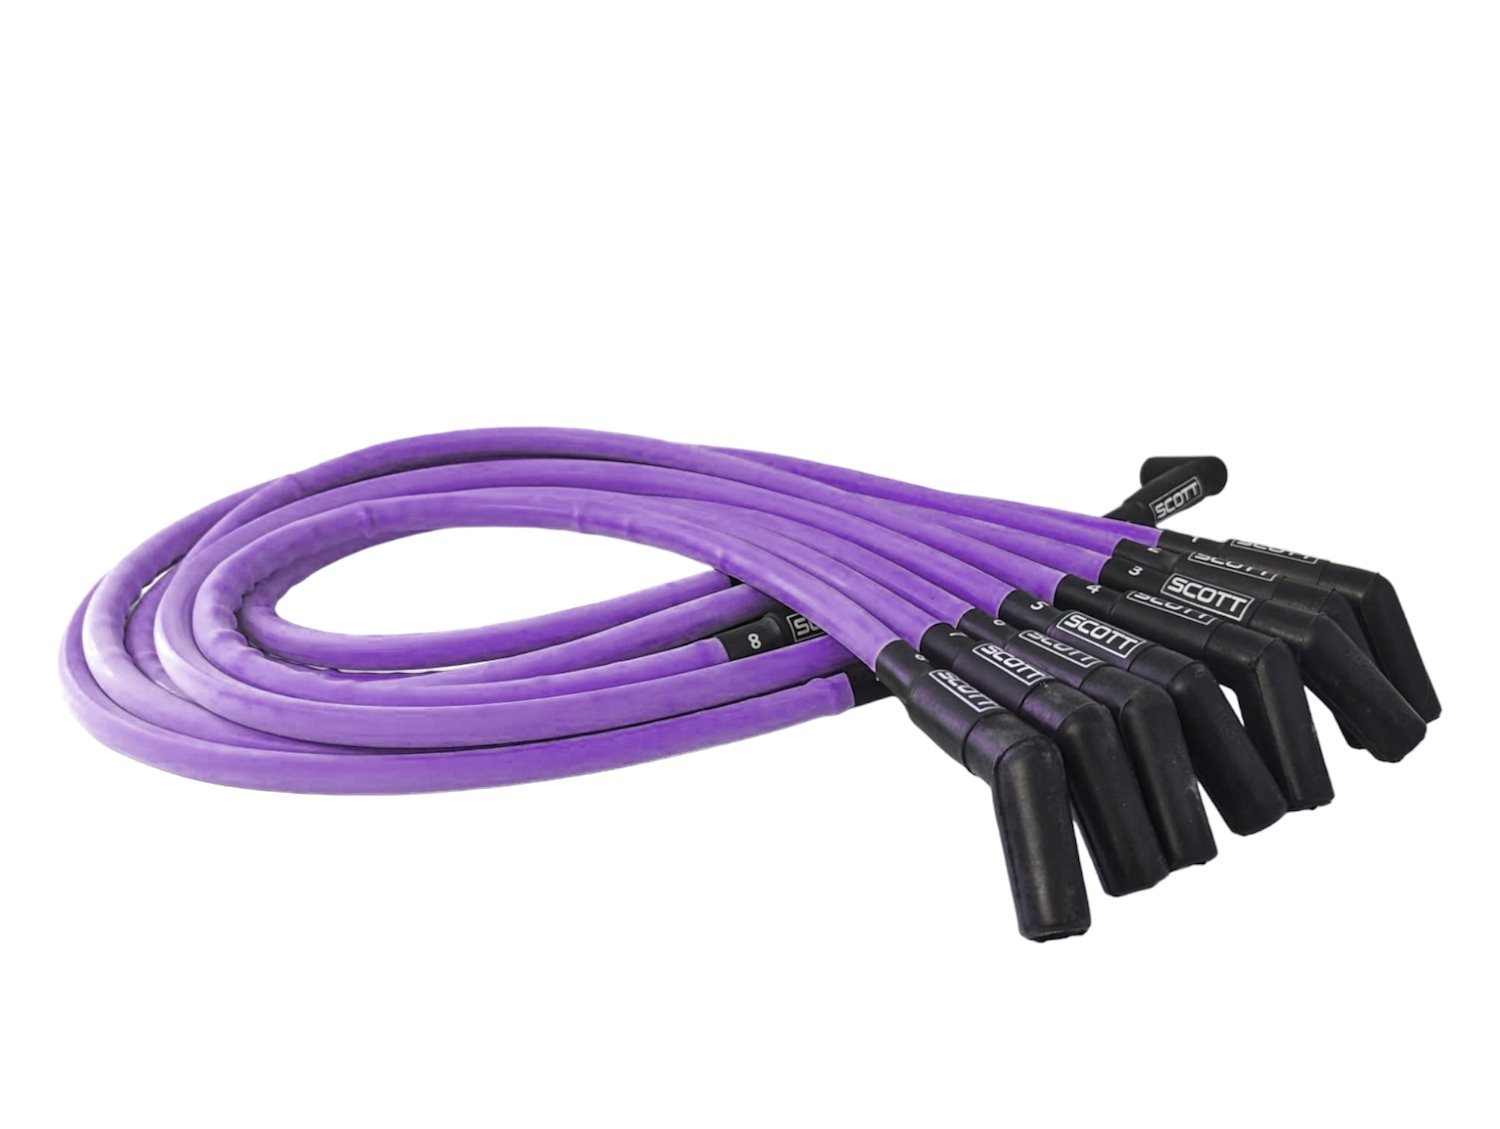 SPW-CH-429-6 High-Performance Silicone-Sleeved Spark Plug Wire Set for Big Block Ford, Over Valve Cover [Purple]